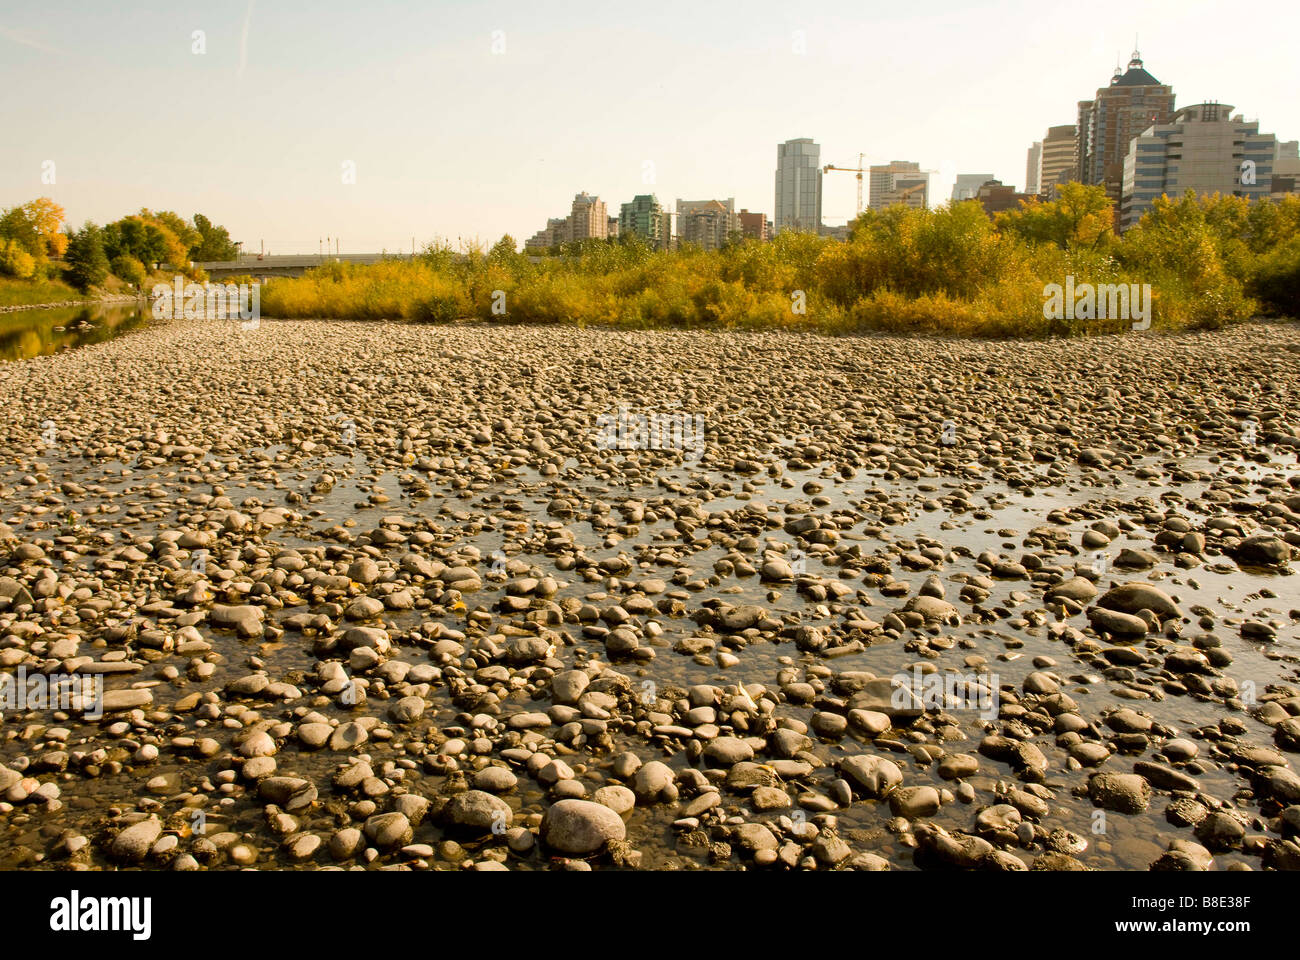 Stones on riverbed visible as river dries up, Calgary, Canada Stock Photo